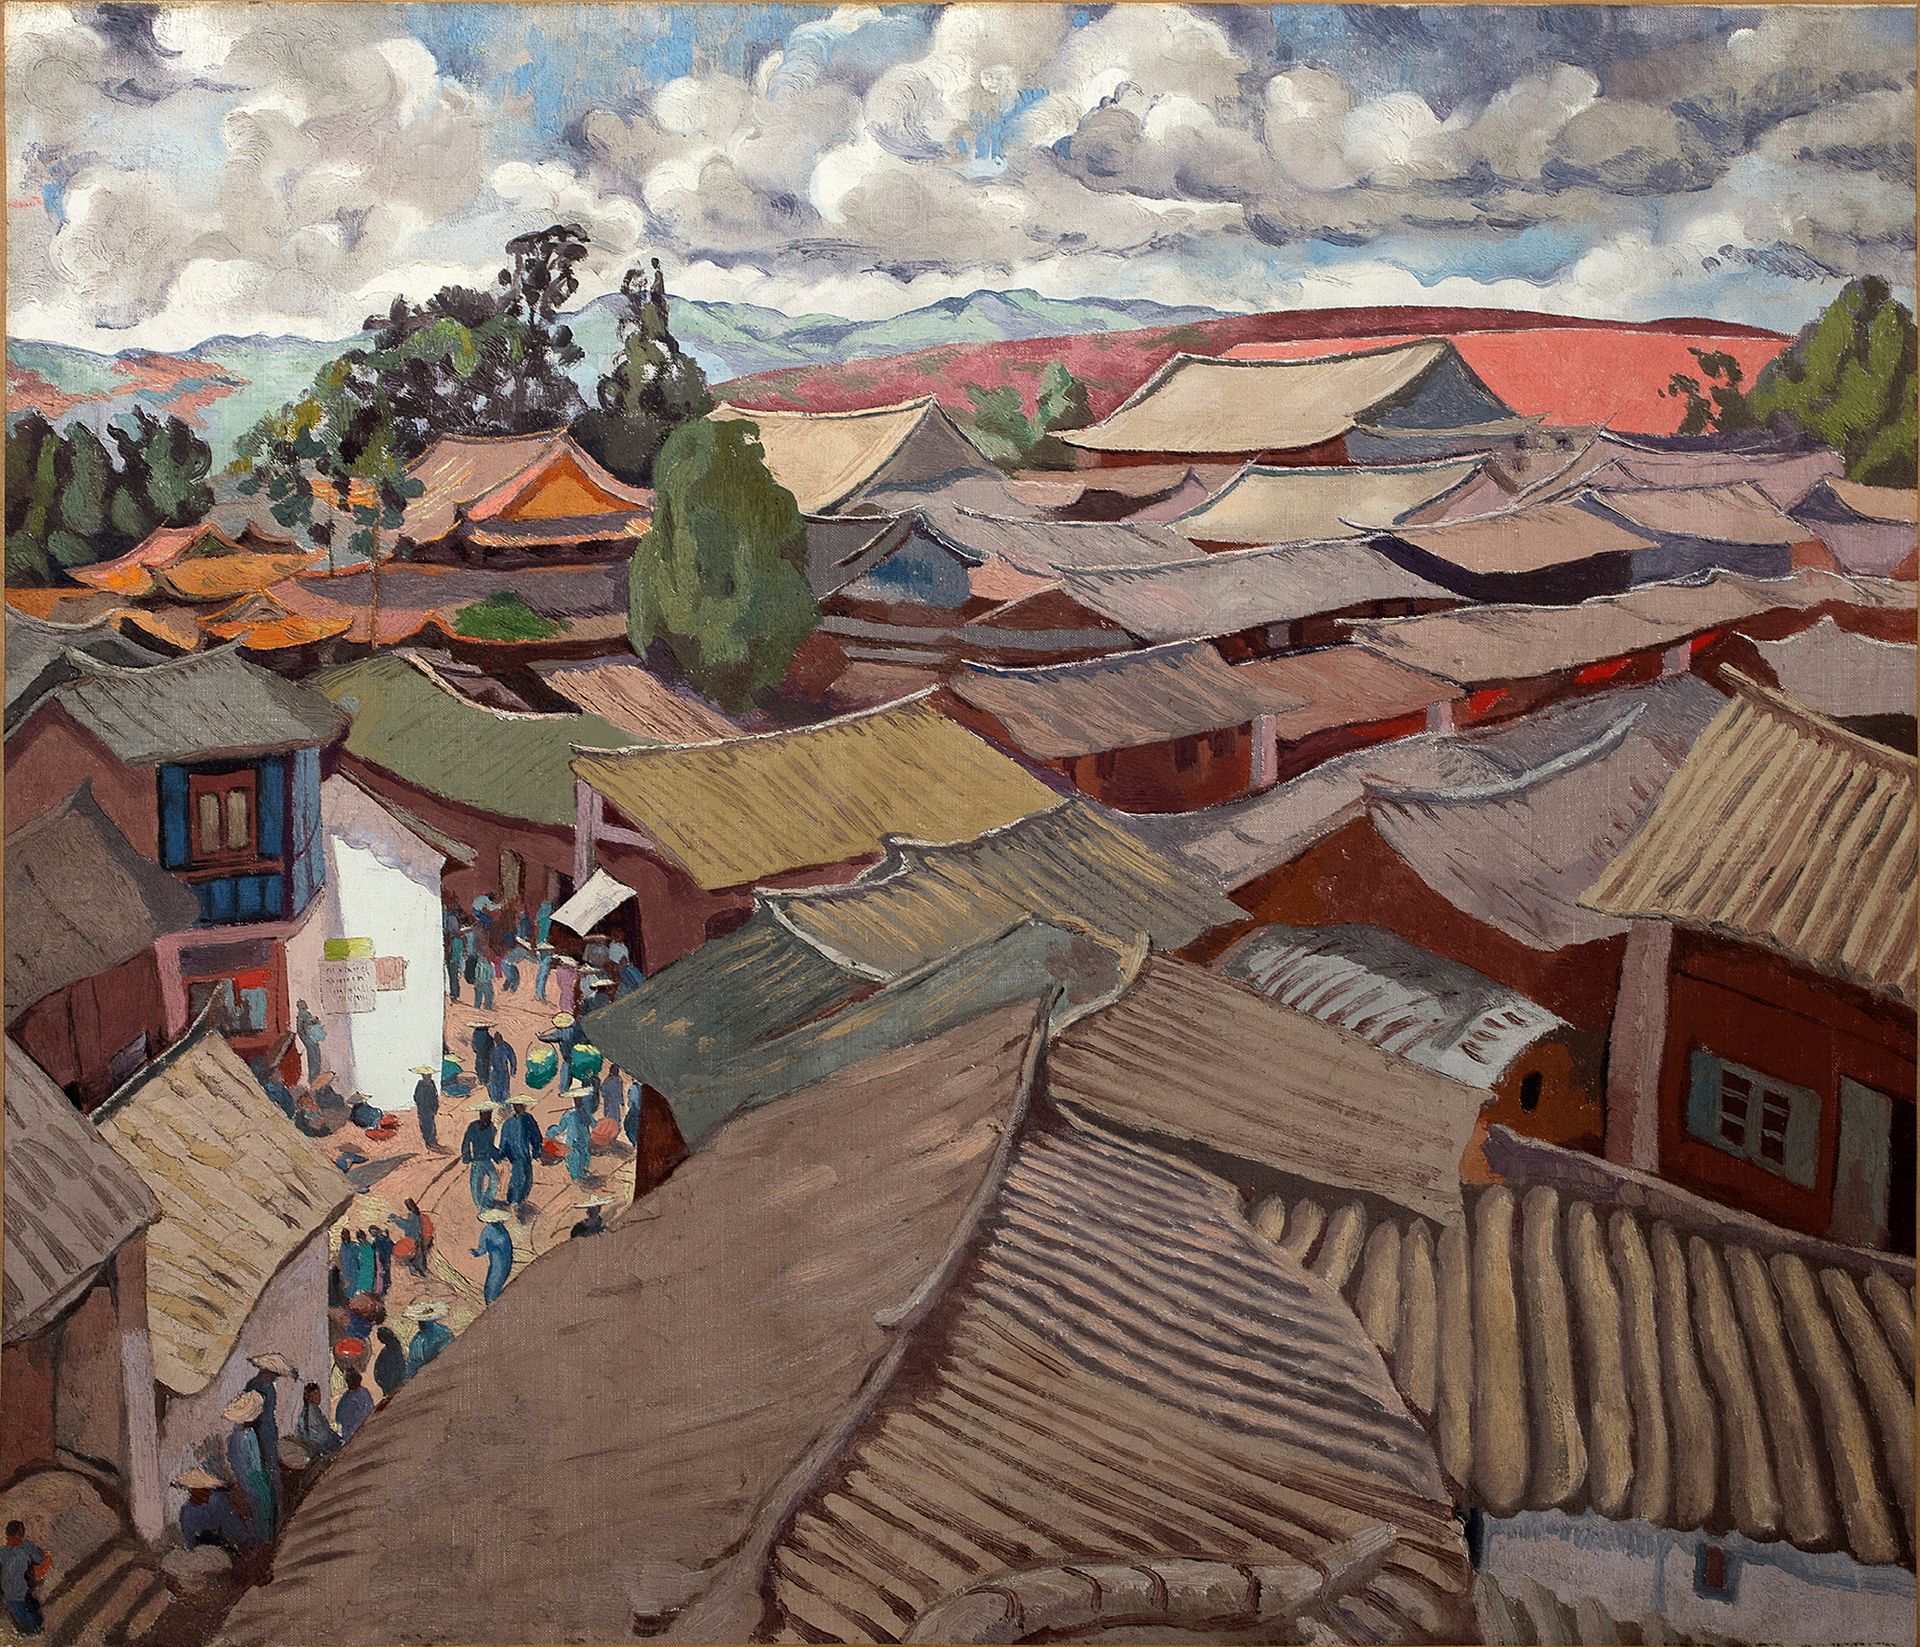 ALIX AYMÉ (1894-1989) 
Les toits de Yunnanfou

Oil on canvas, located on the bac&hellip;